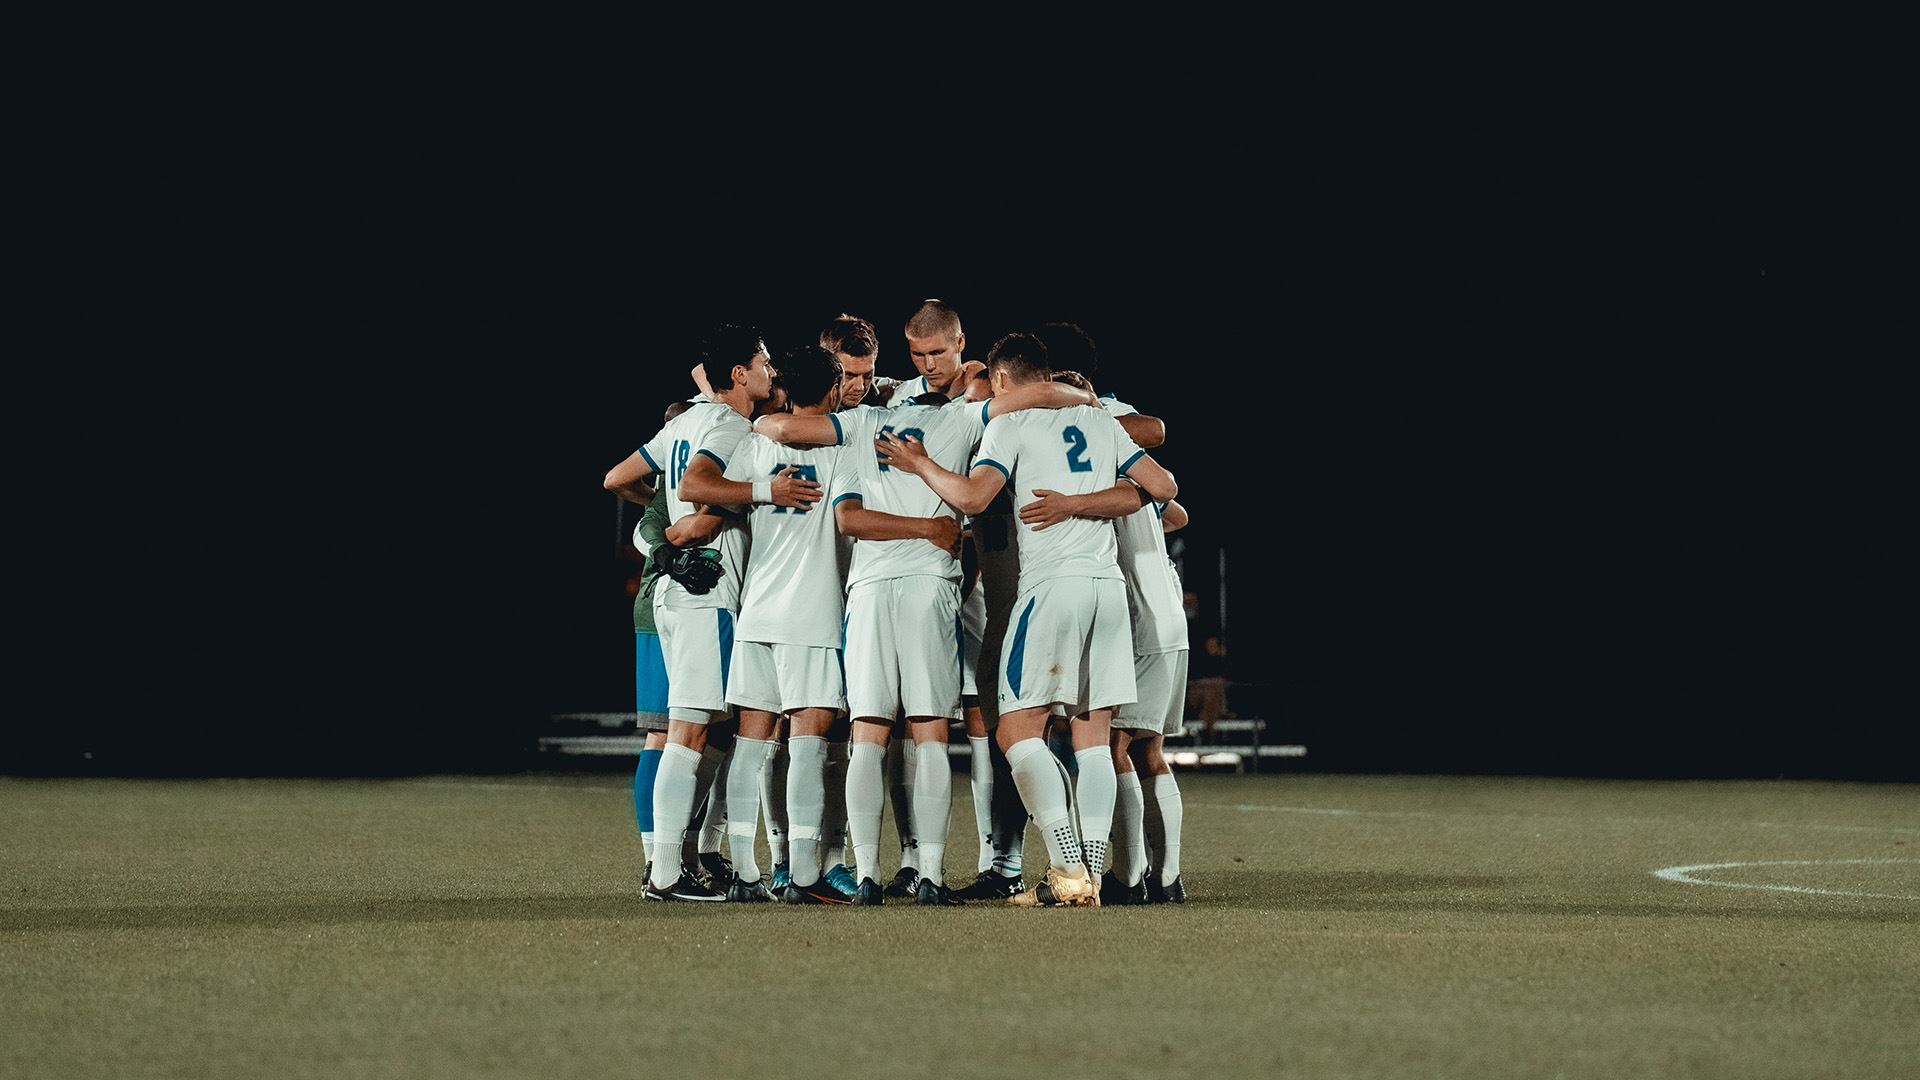 The Seton Hall men's soccer team huddle on the field before an important soccer game.